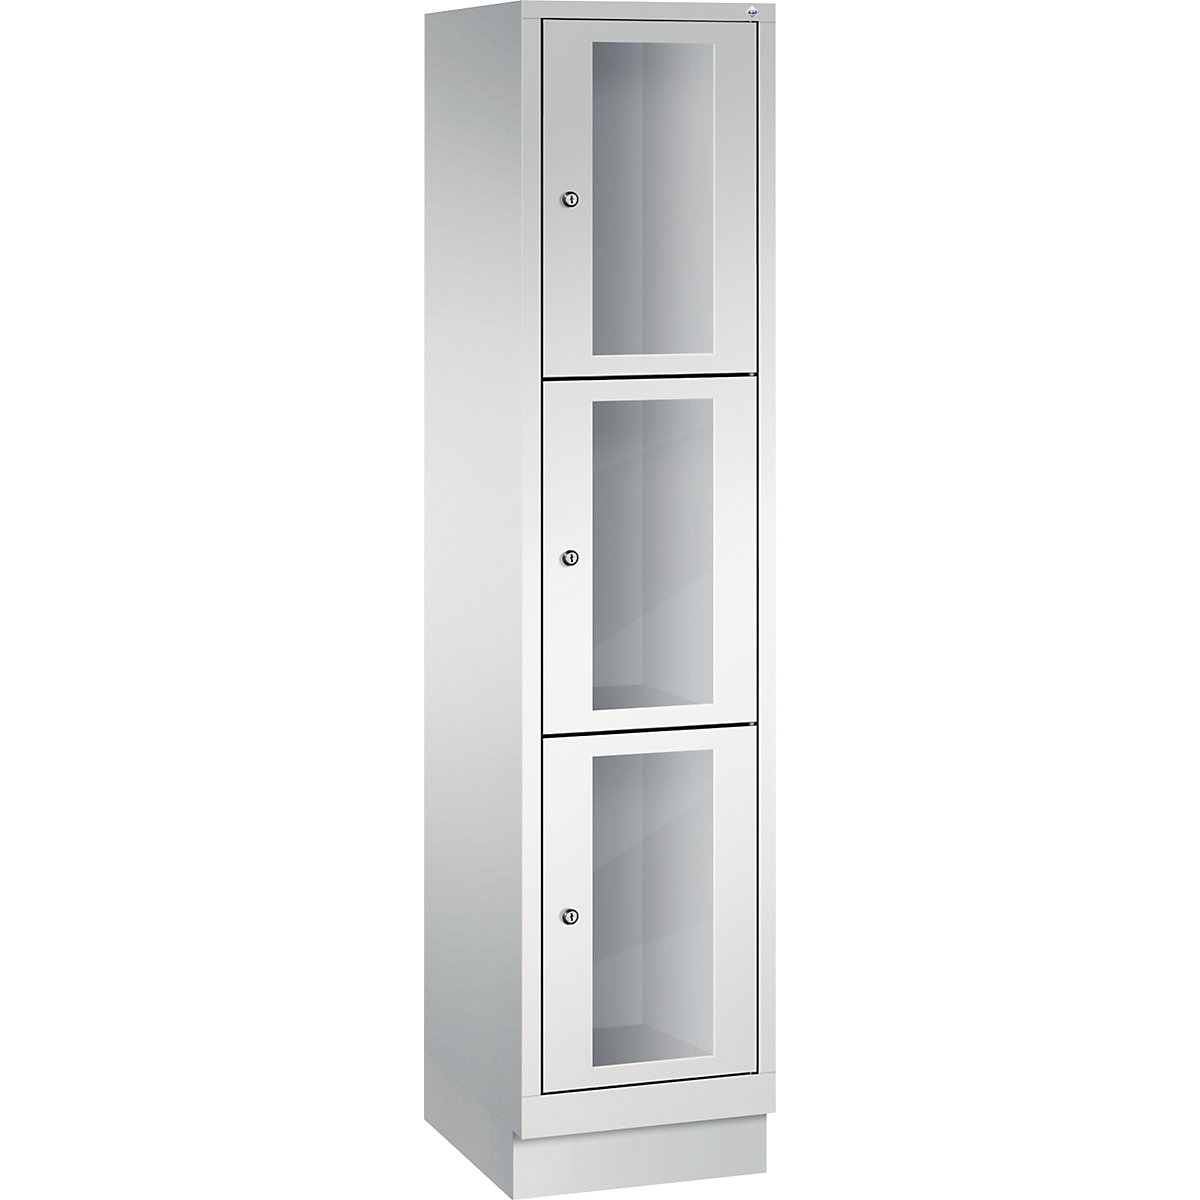 C+P – CLASSIC locker unit, compartment height 510 mm, with plinth, 3 compartments, width 420 mm, light grey door